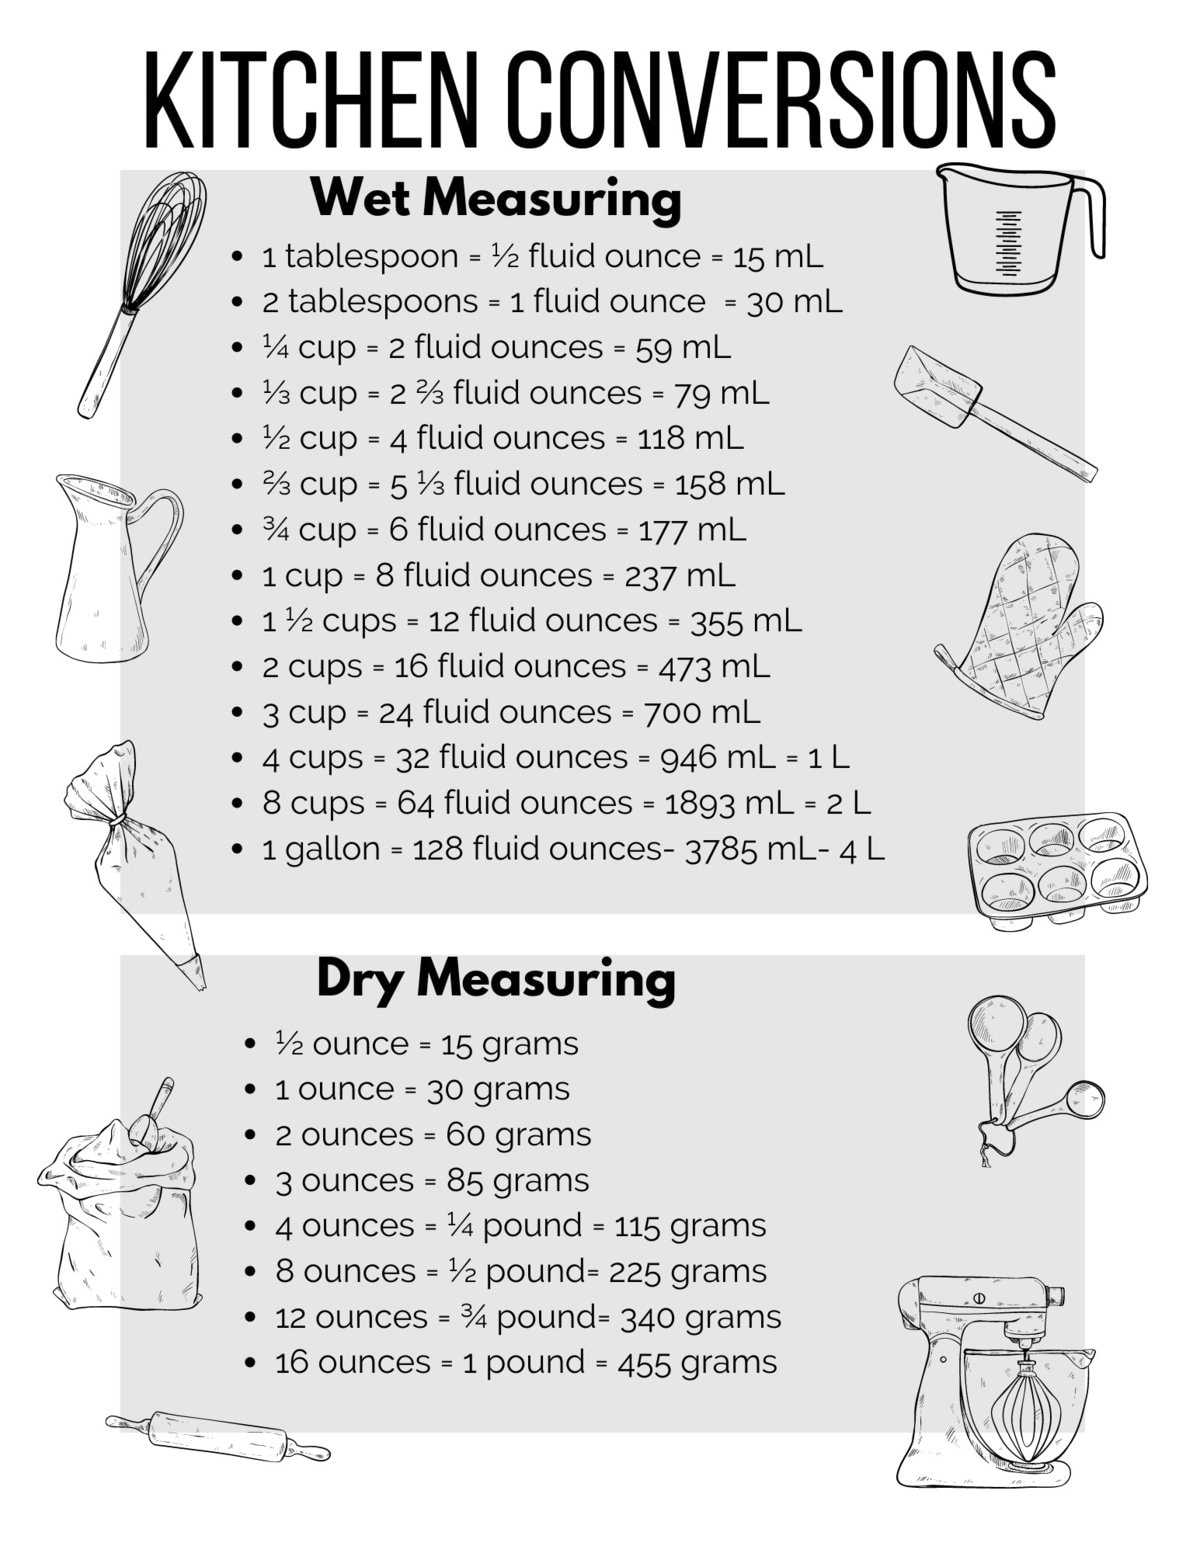 Be precise when you're measuring How Many Ounces in a Cup! Whether you are measuring wet or dry ingredients, this guide will help you to calculate accurately.